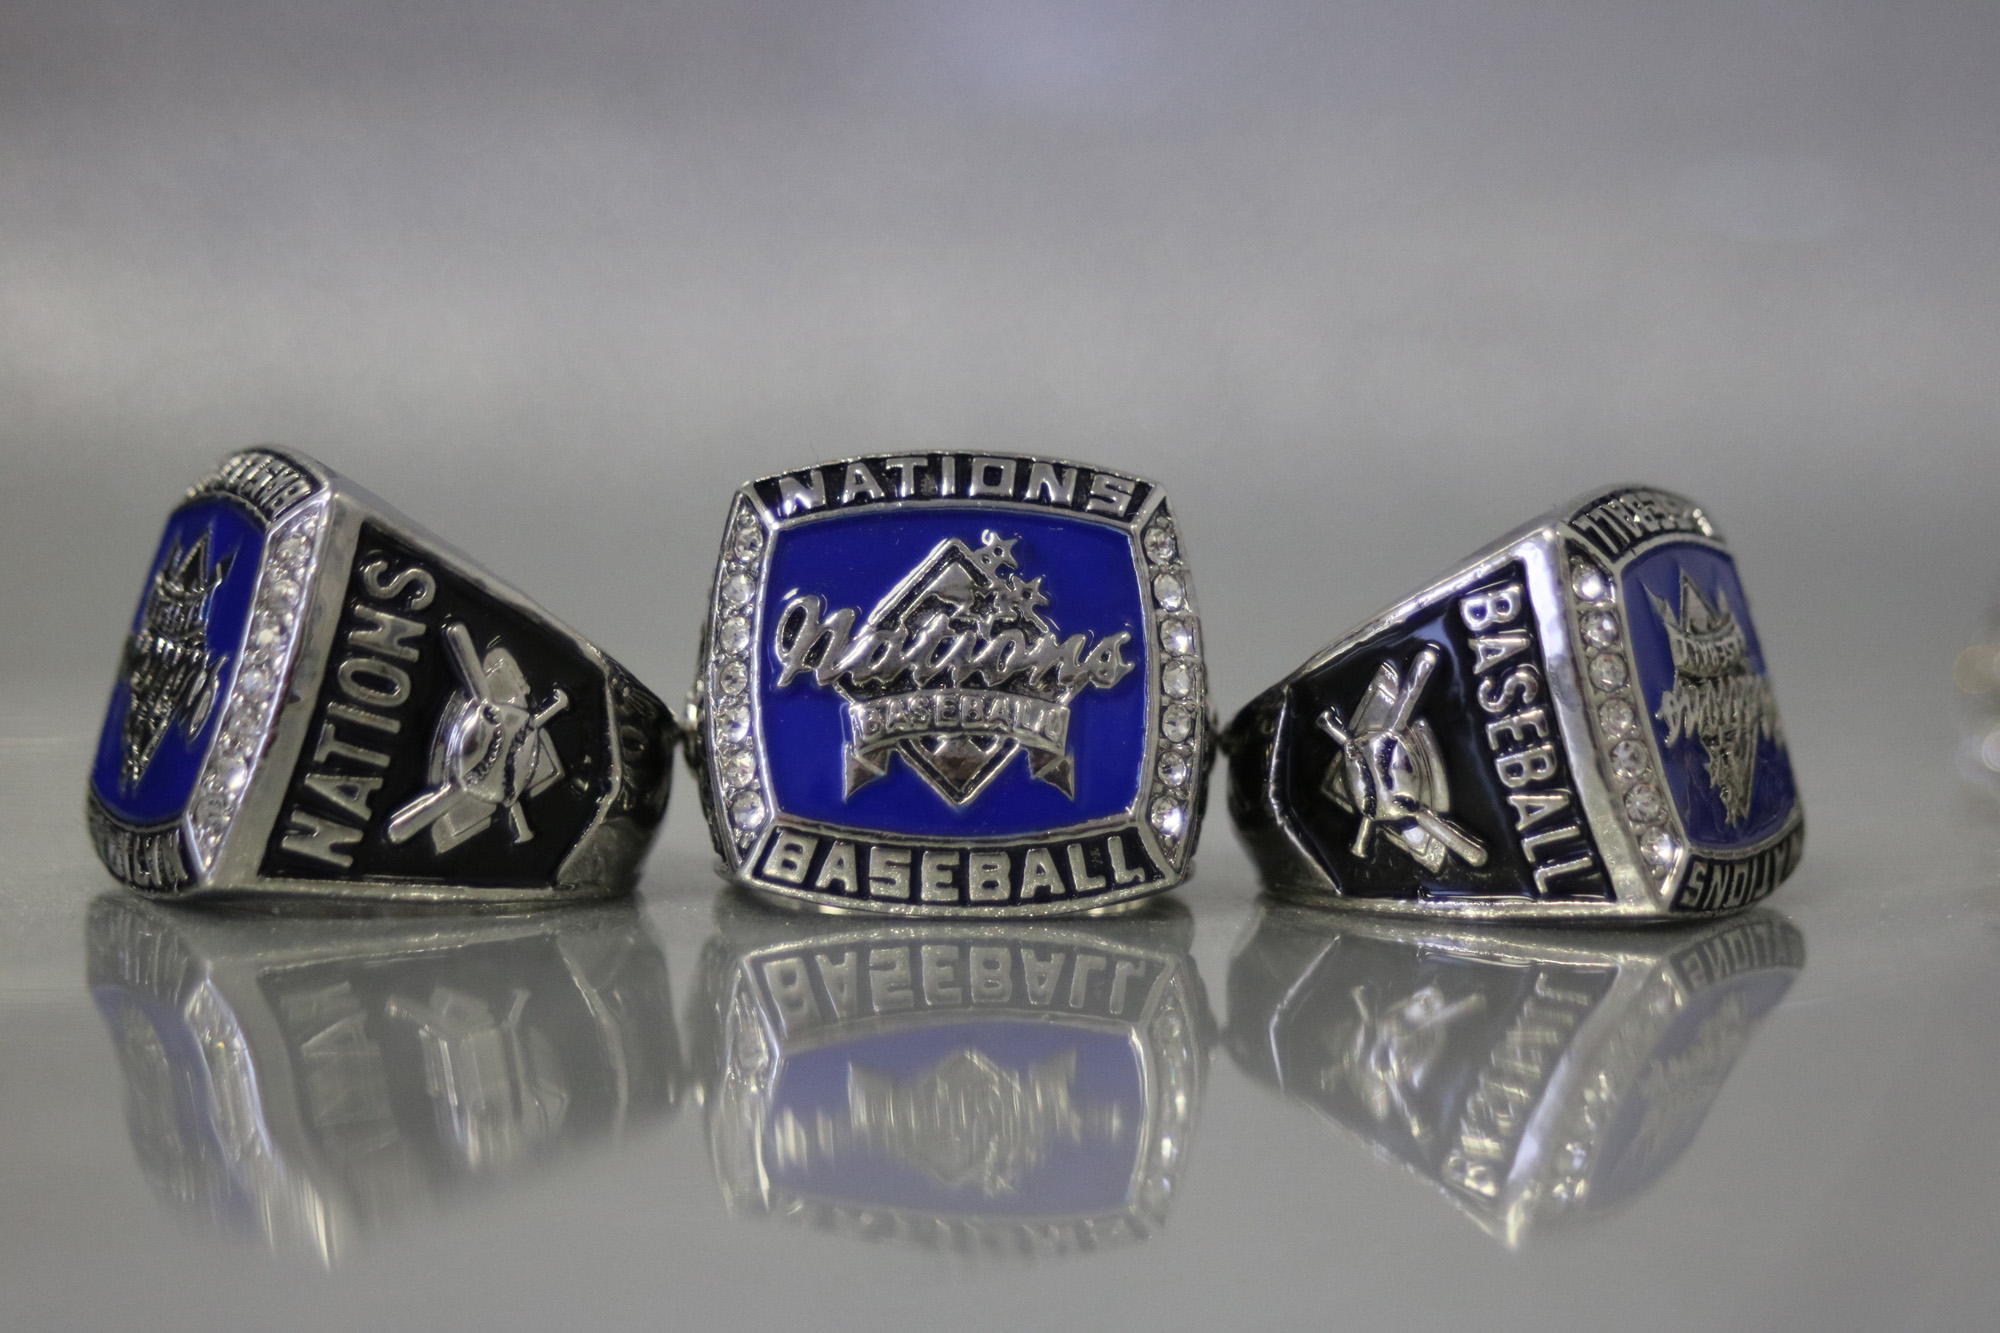 #1 Custom Championship Rings in USA, High Quality - Free Quote